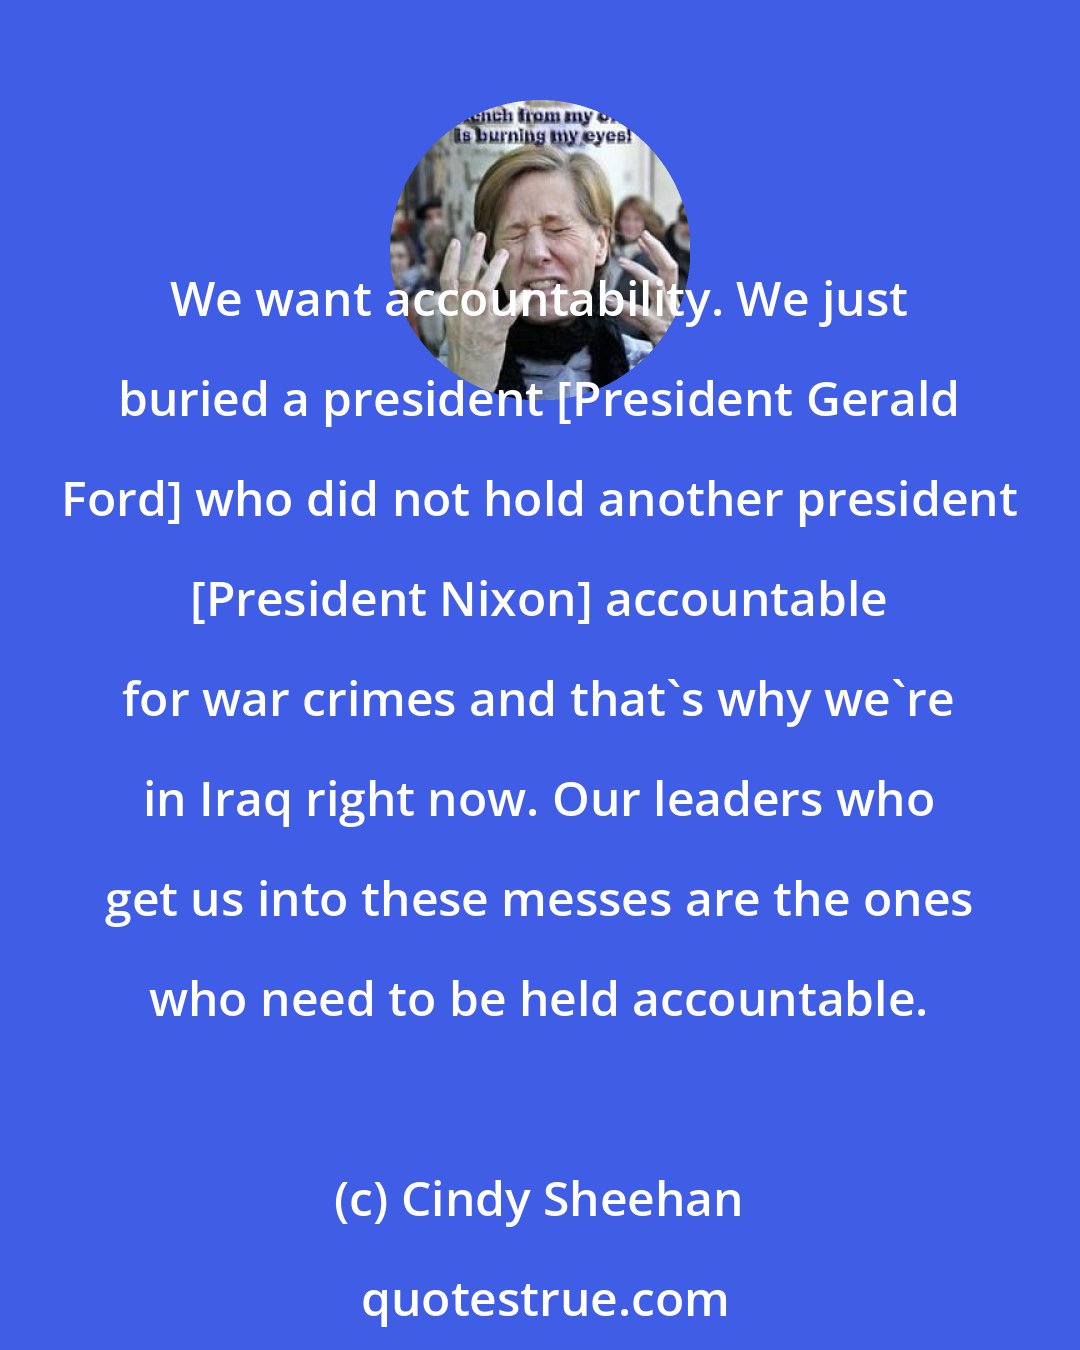 Cindy Sheehan: We want accountability. We just buried a president [President Gerald Ford] who did not hold another president [President Nixon] accountable for war crimes and that's why we're in Iraq right now. Our leaders who get us into these messes are the ones who need to be held accountable.